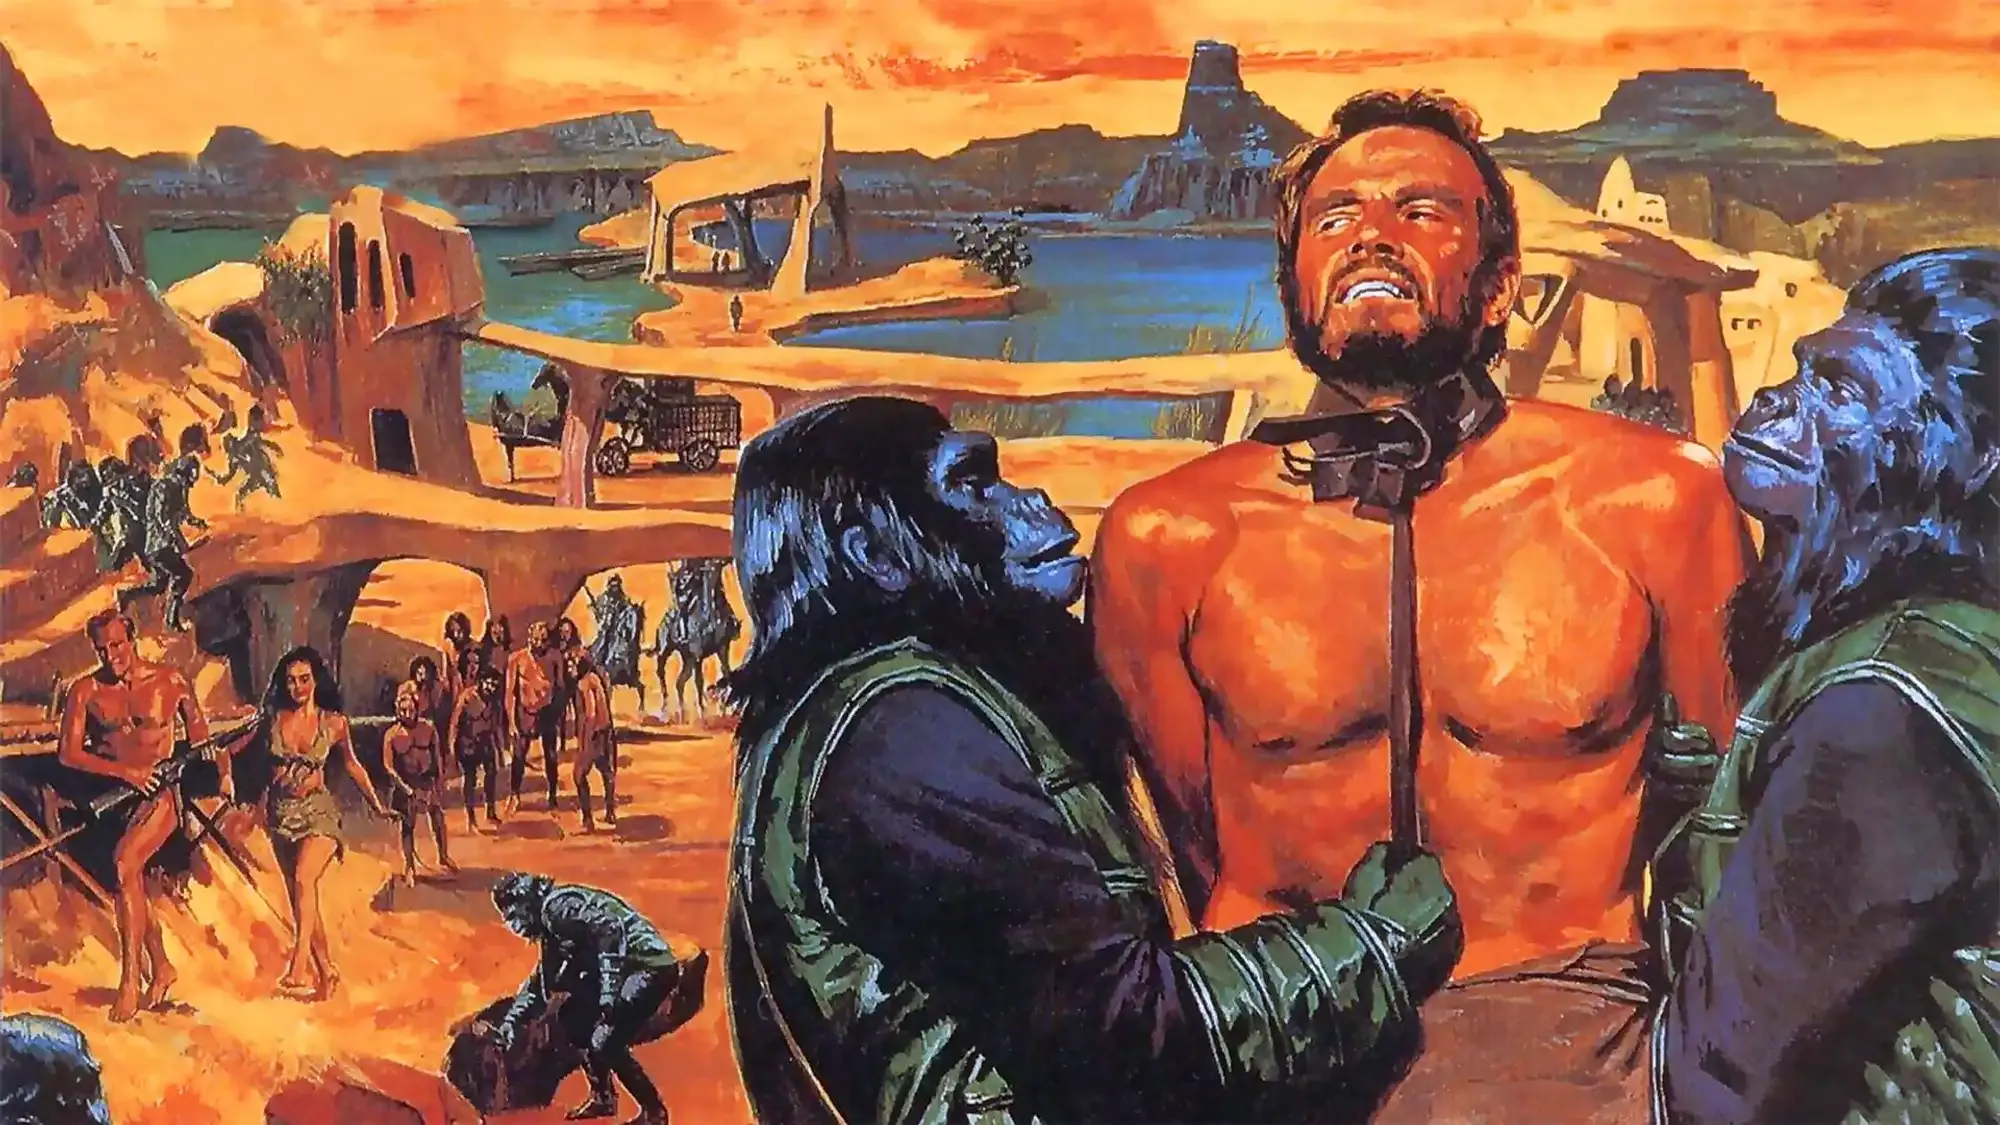 Planet of the Apes movie review